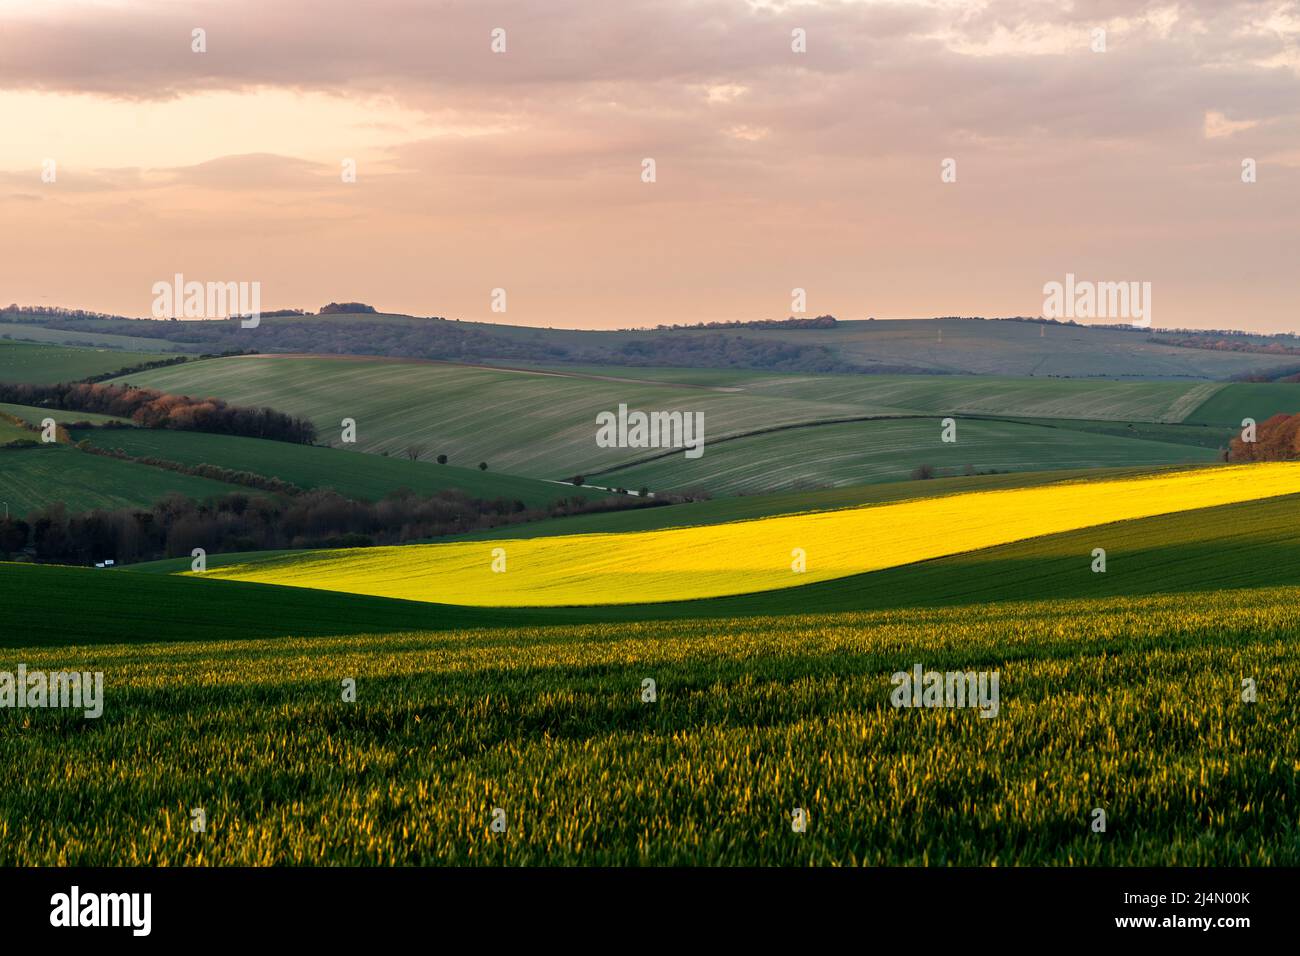 Falmer, East Sussex, UK. , . The beautiful rolling hills on the South Downs, just north of Brighton. The vivid yellow field of oilseed rape crop is set again the lush green fields, set against a sunset on a warm spring evening. Credit: Sarah Mott/Alamy Live News Stock Photo